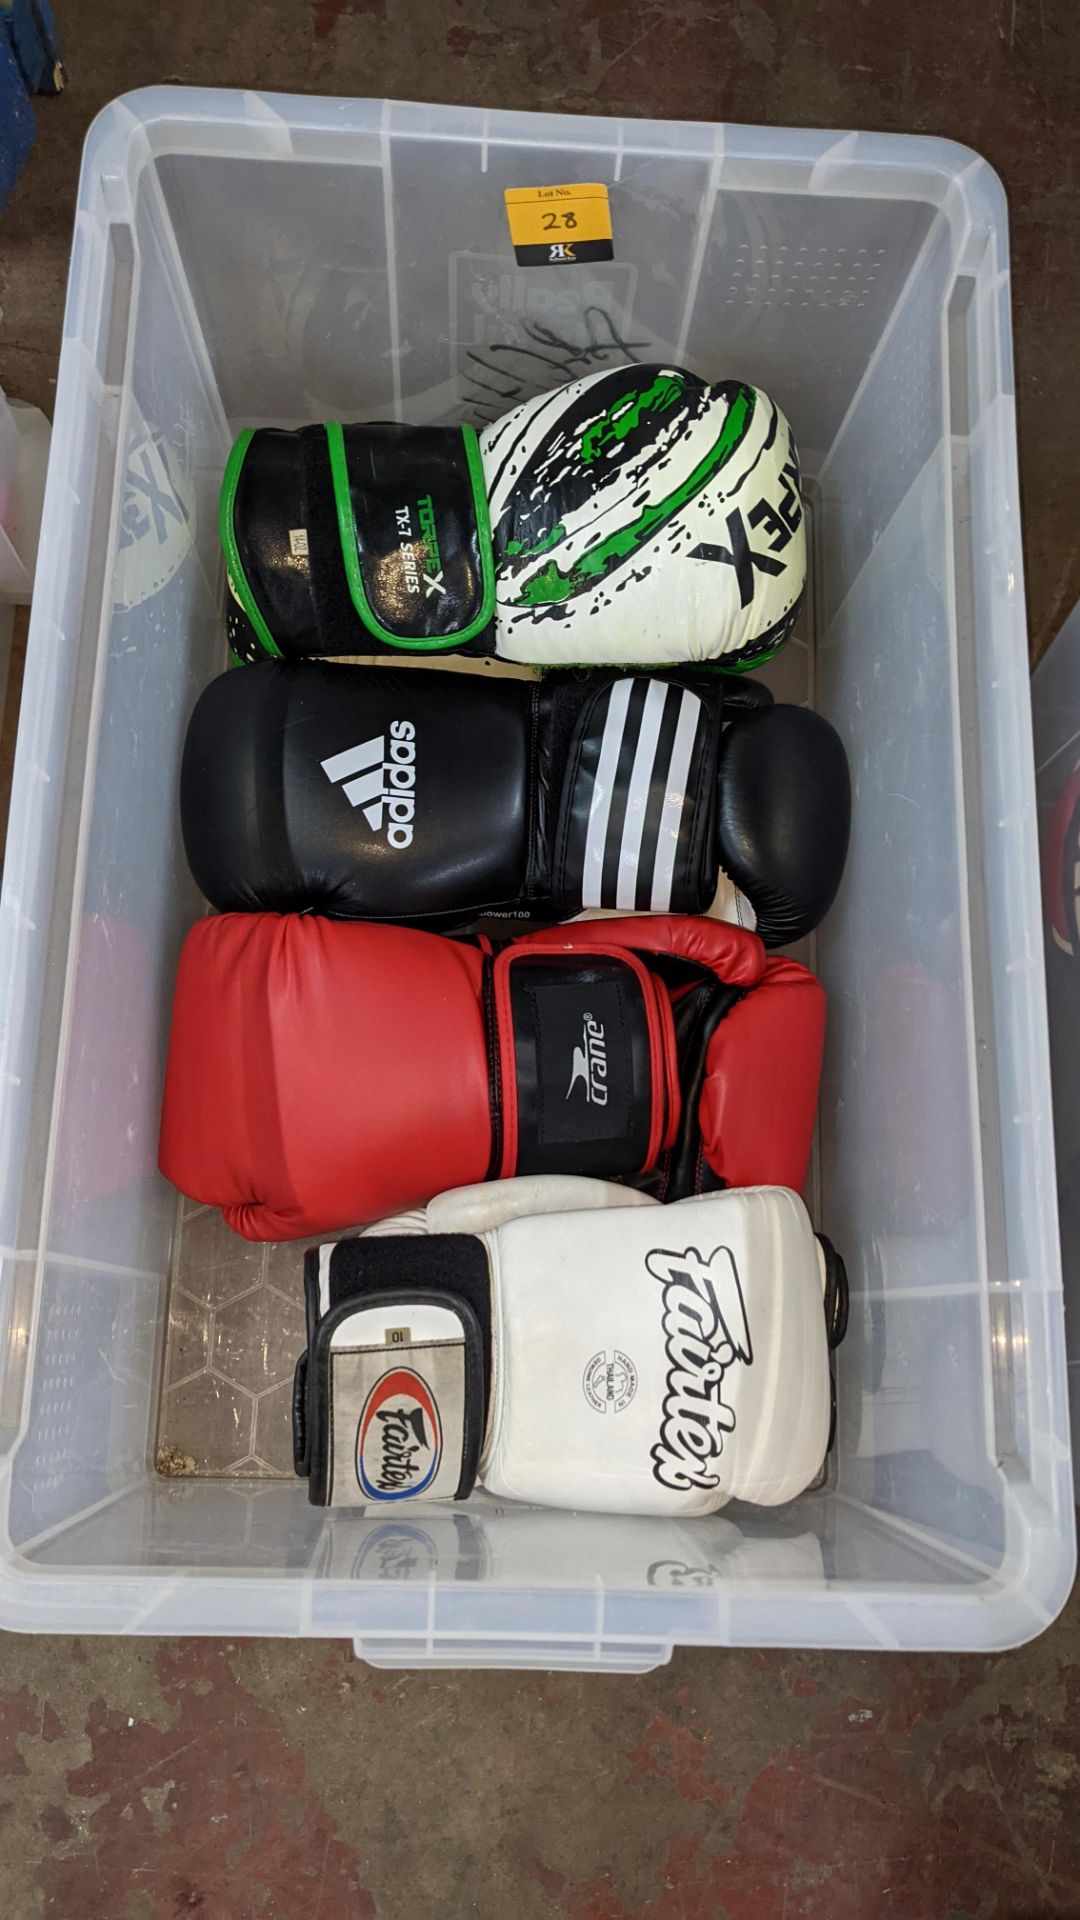 4 pairs of boxing gloves by Torpex, Fairtex, Crane & Adidas. NB please note rip to one of the Torpe